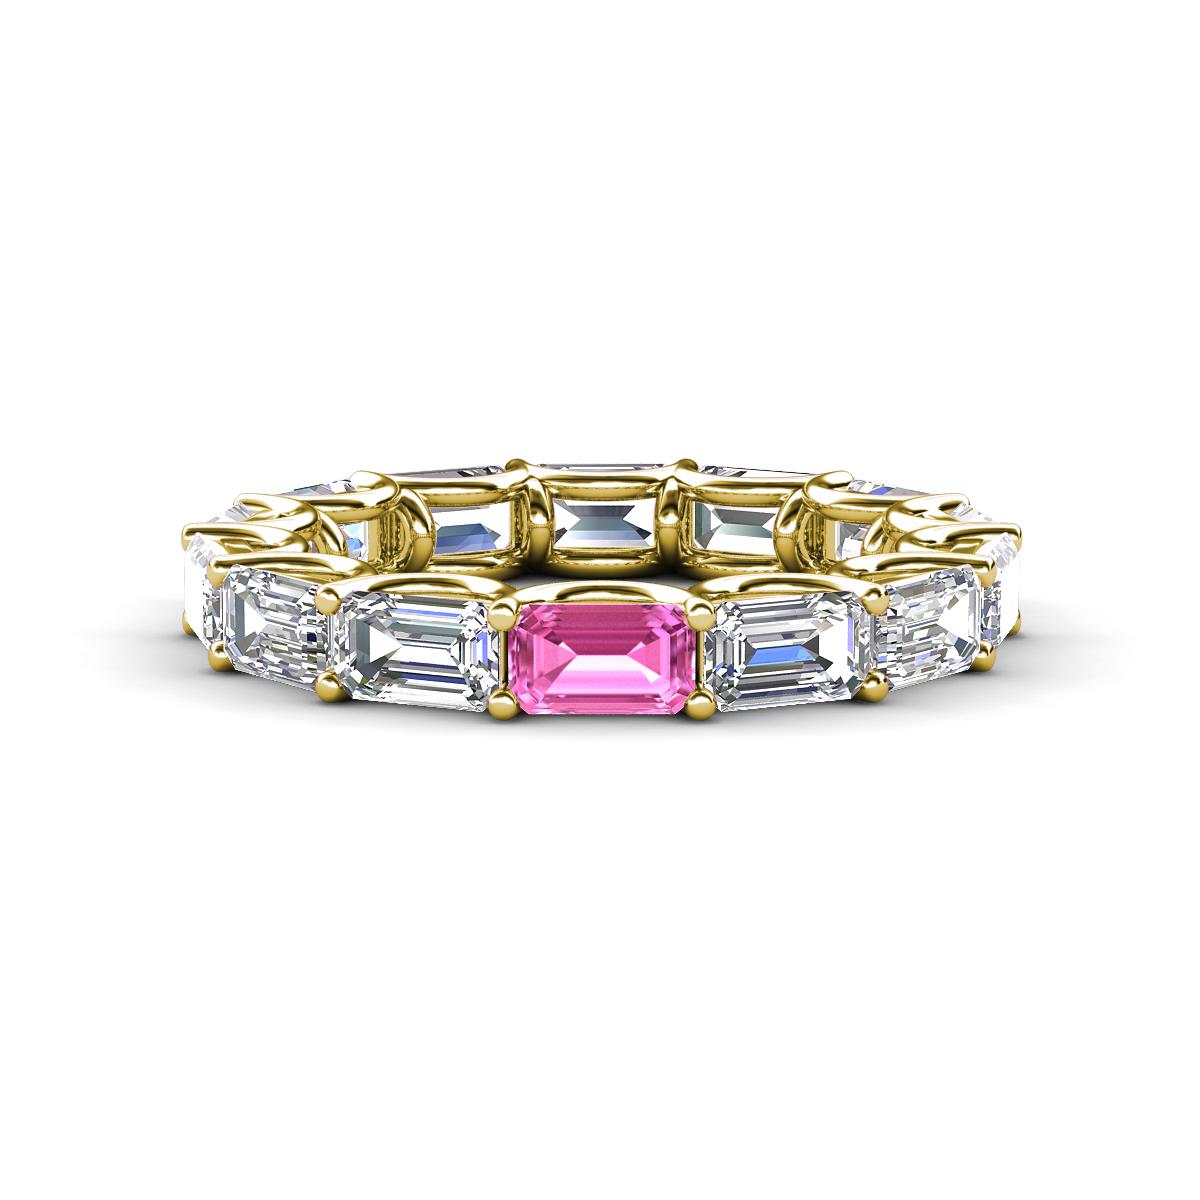 Beverly 5x3 mm Emerald Cut Forever Brilliant Moissanite and Pink Sapphire Eternity Band 